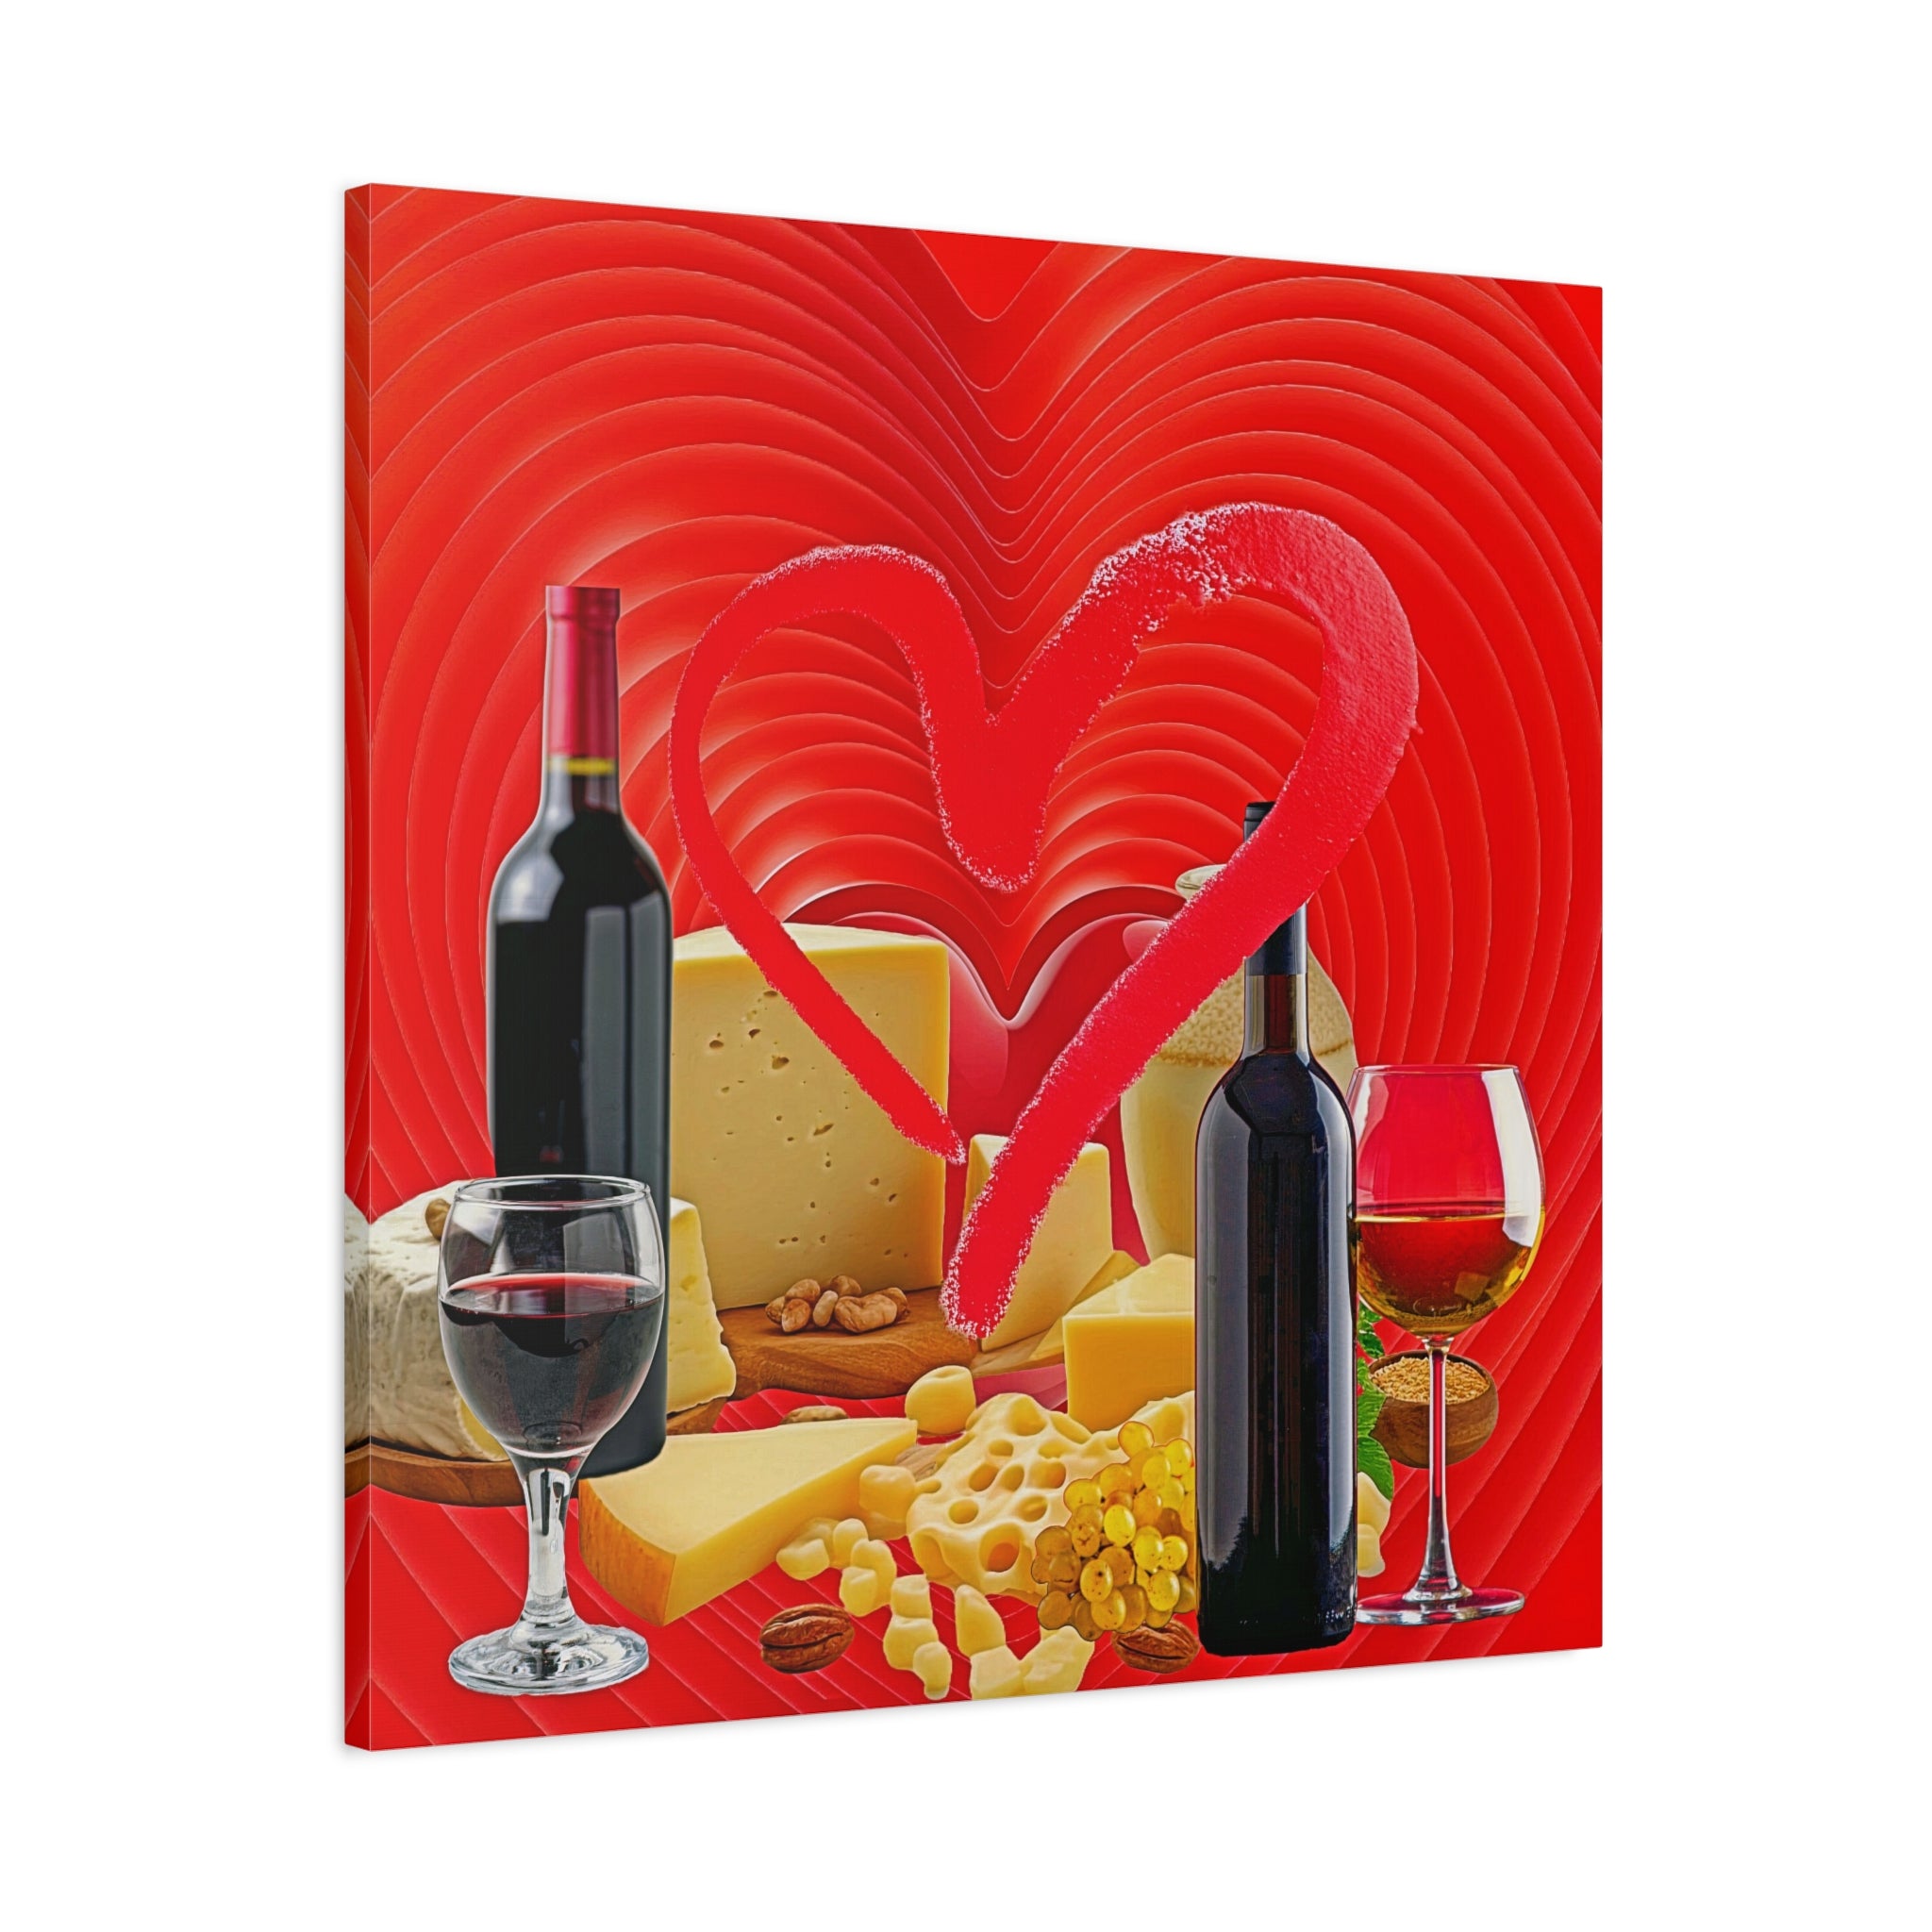 Wall Art LOVE WINE & CHEESE Canvas Print Painting Original Giclee 32X32 GW Nice Beauty Fun Design Fit Red Hot House Gift Ready to Hang